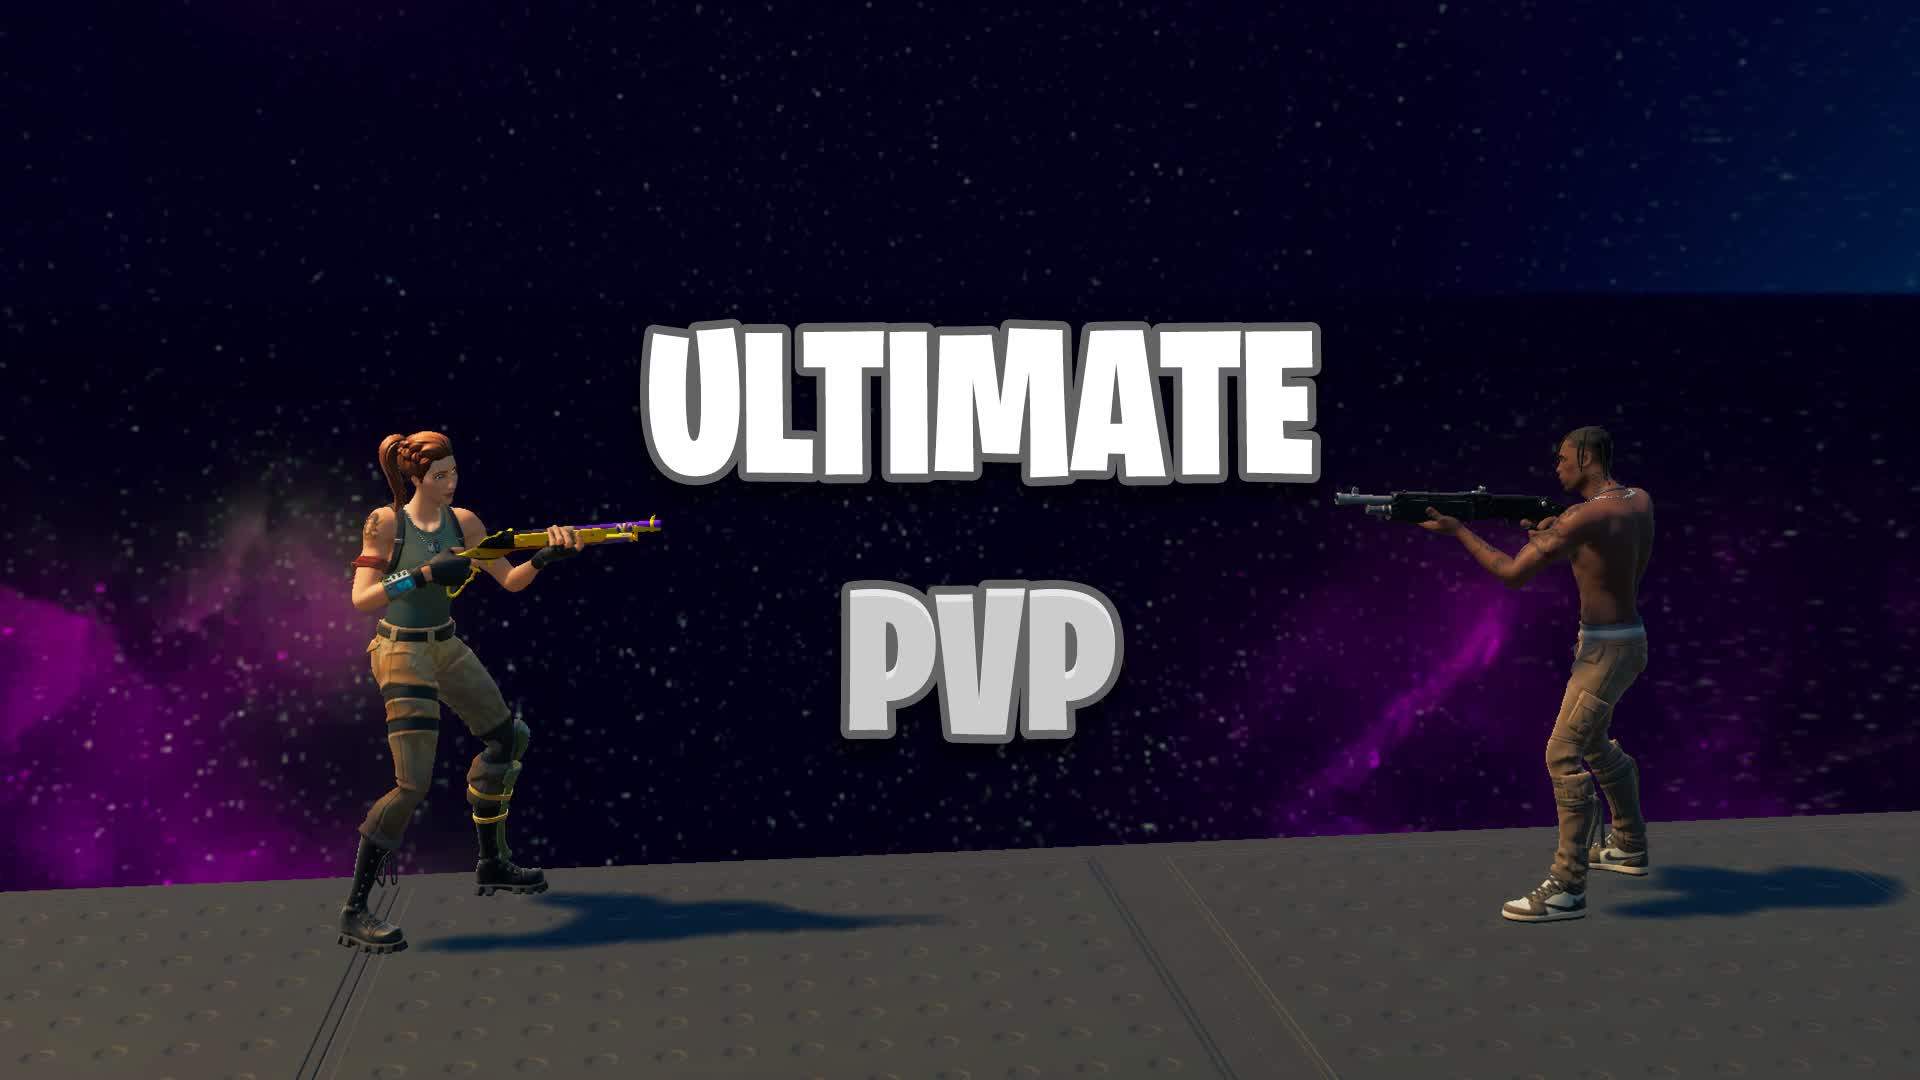 🔥ULTIMATE PVP🎯